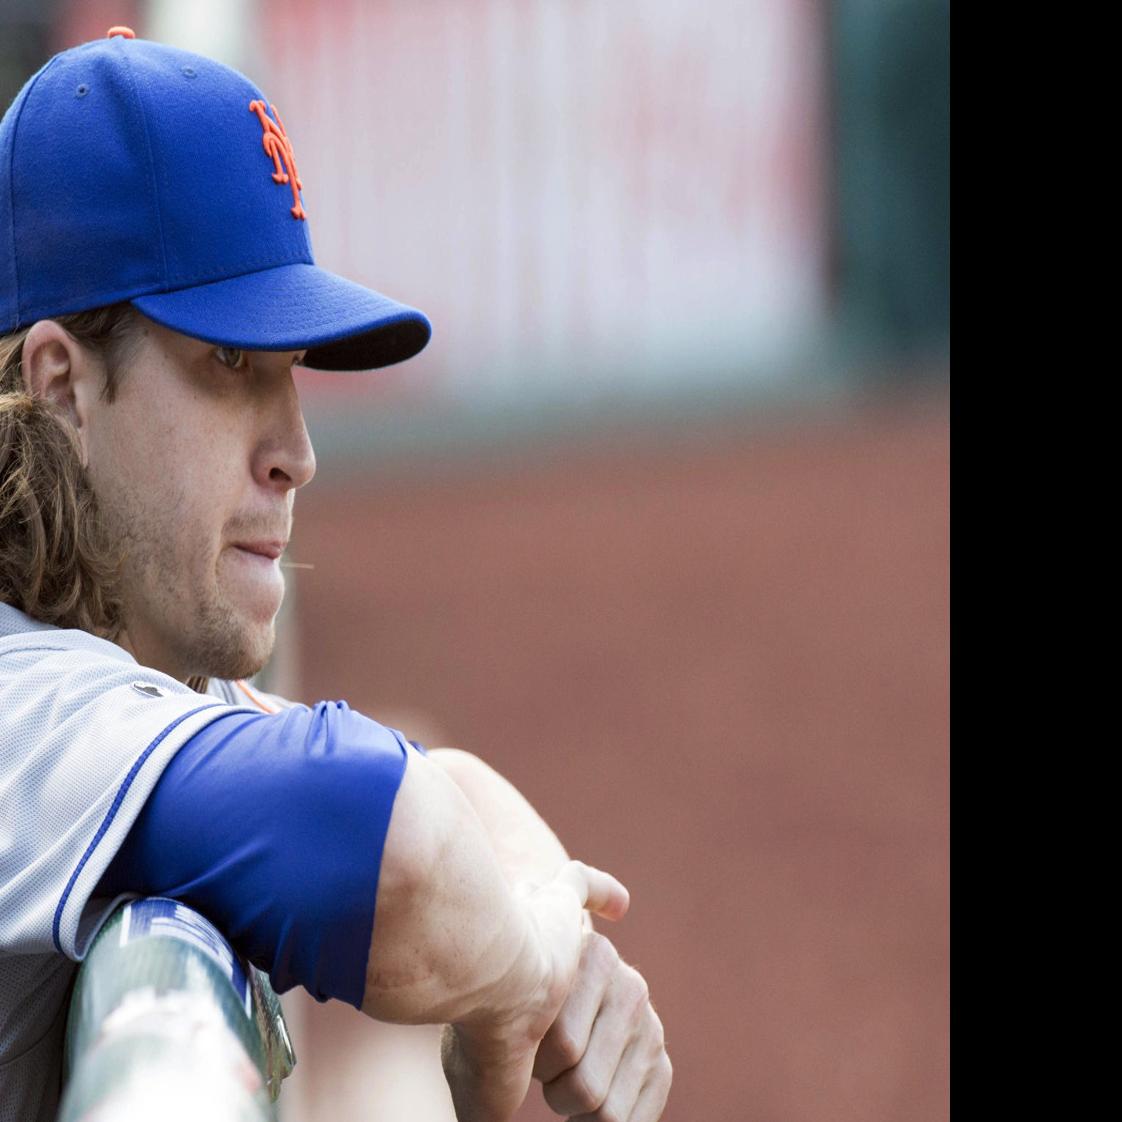 Mets' deGrom strikes out first 8 batters, ties MLB record